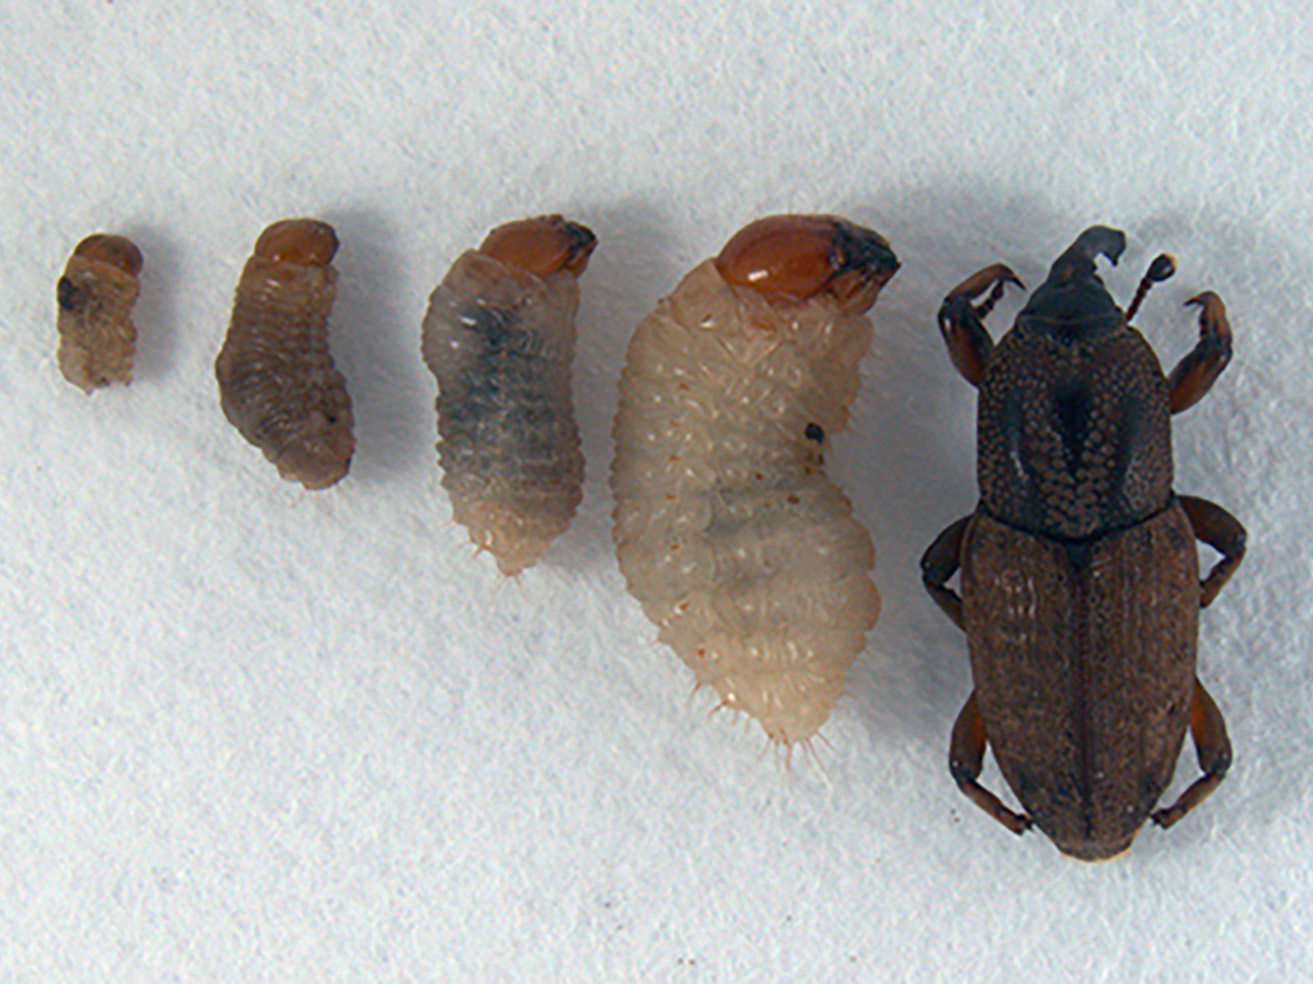 Fig. 5. Billbug larvae resemble small (1/4 - 1/2 in. long) grains of puffed rice with a brown head.